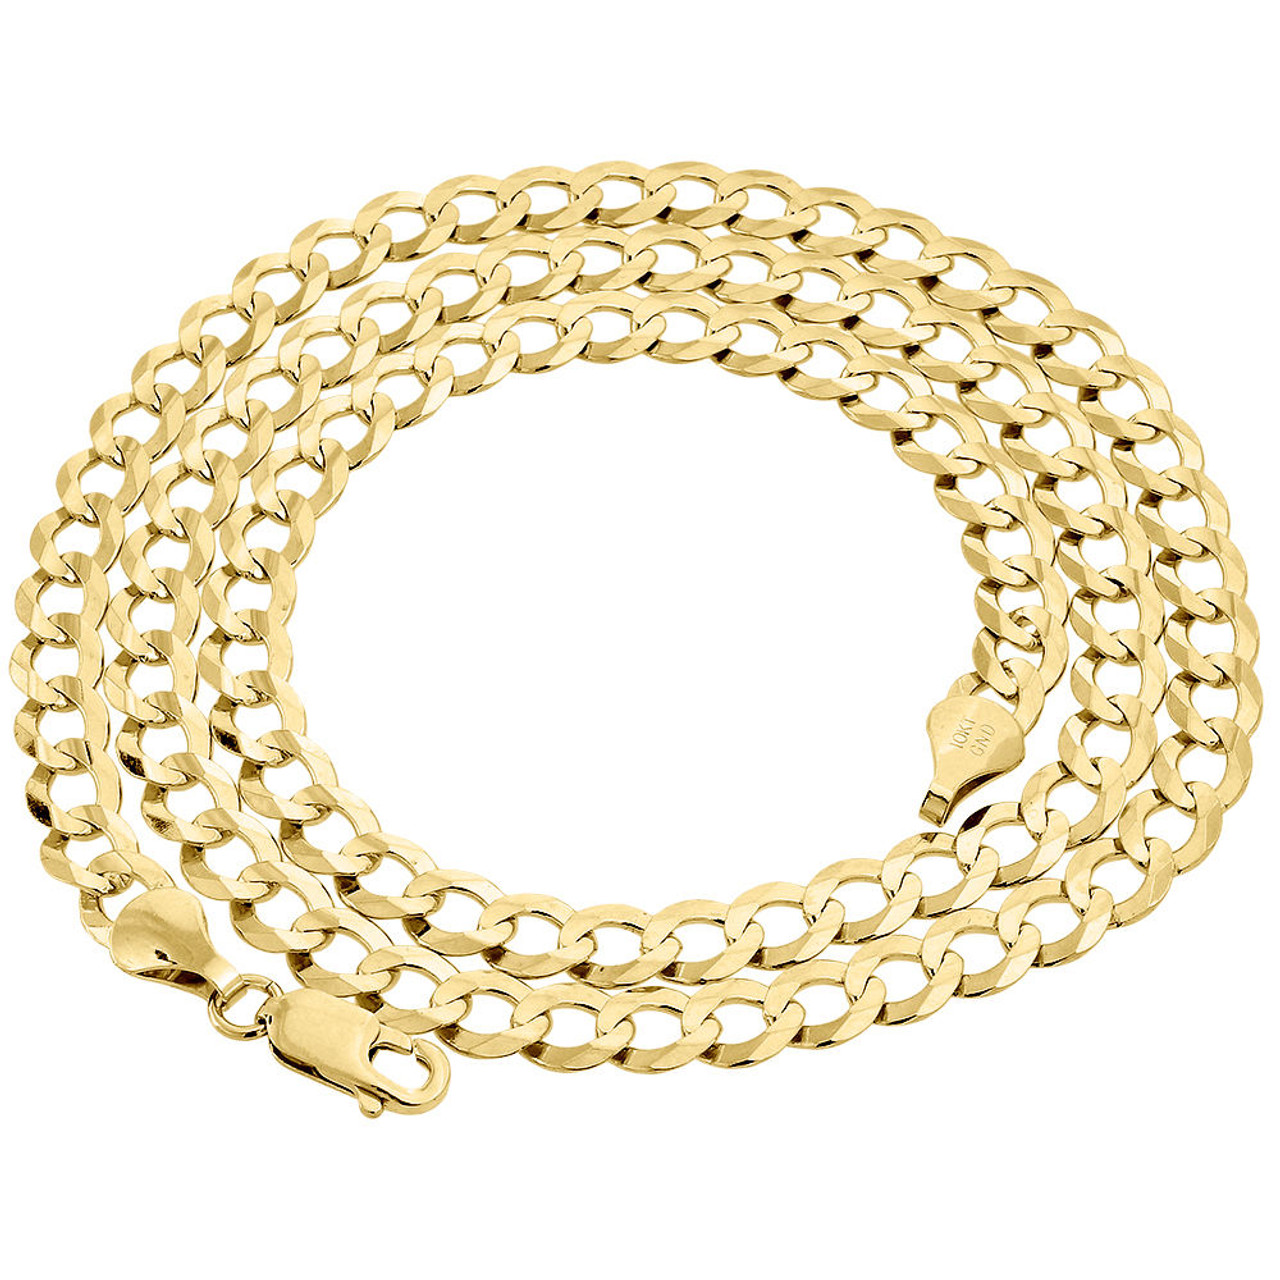 10k Yellow Gold Solid Plain Curb Cuban Chain 5.5mm Necklace 18" - 34"